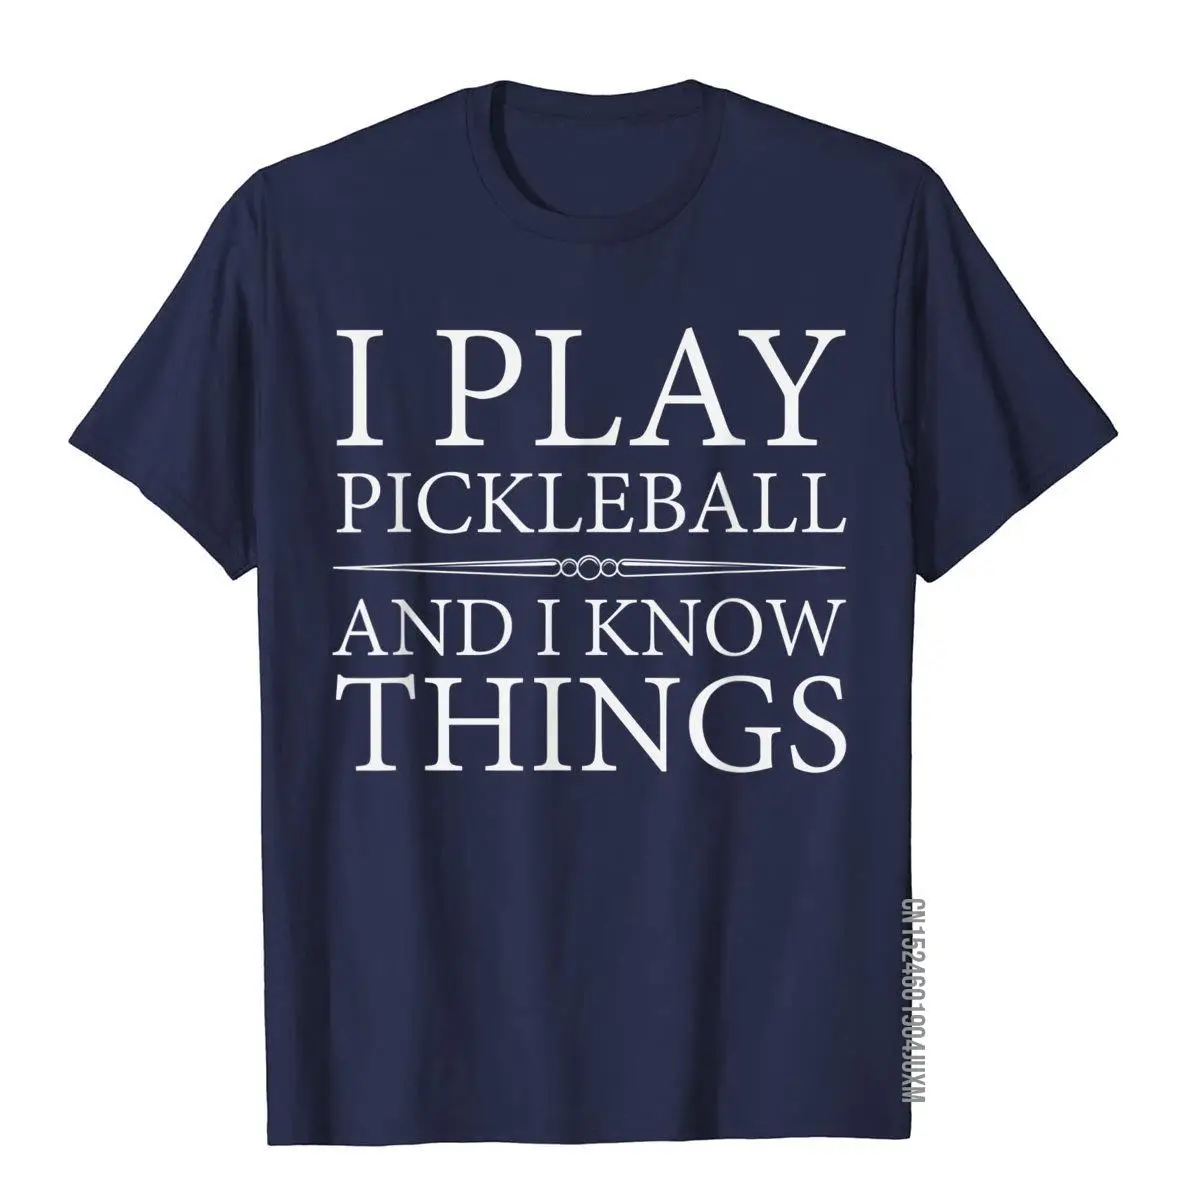 I Play Pickleball And I Know Things Tee Shirt__97A1073navy